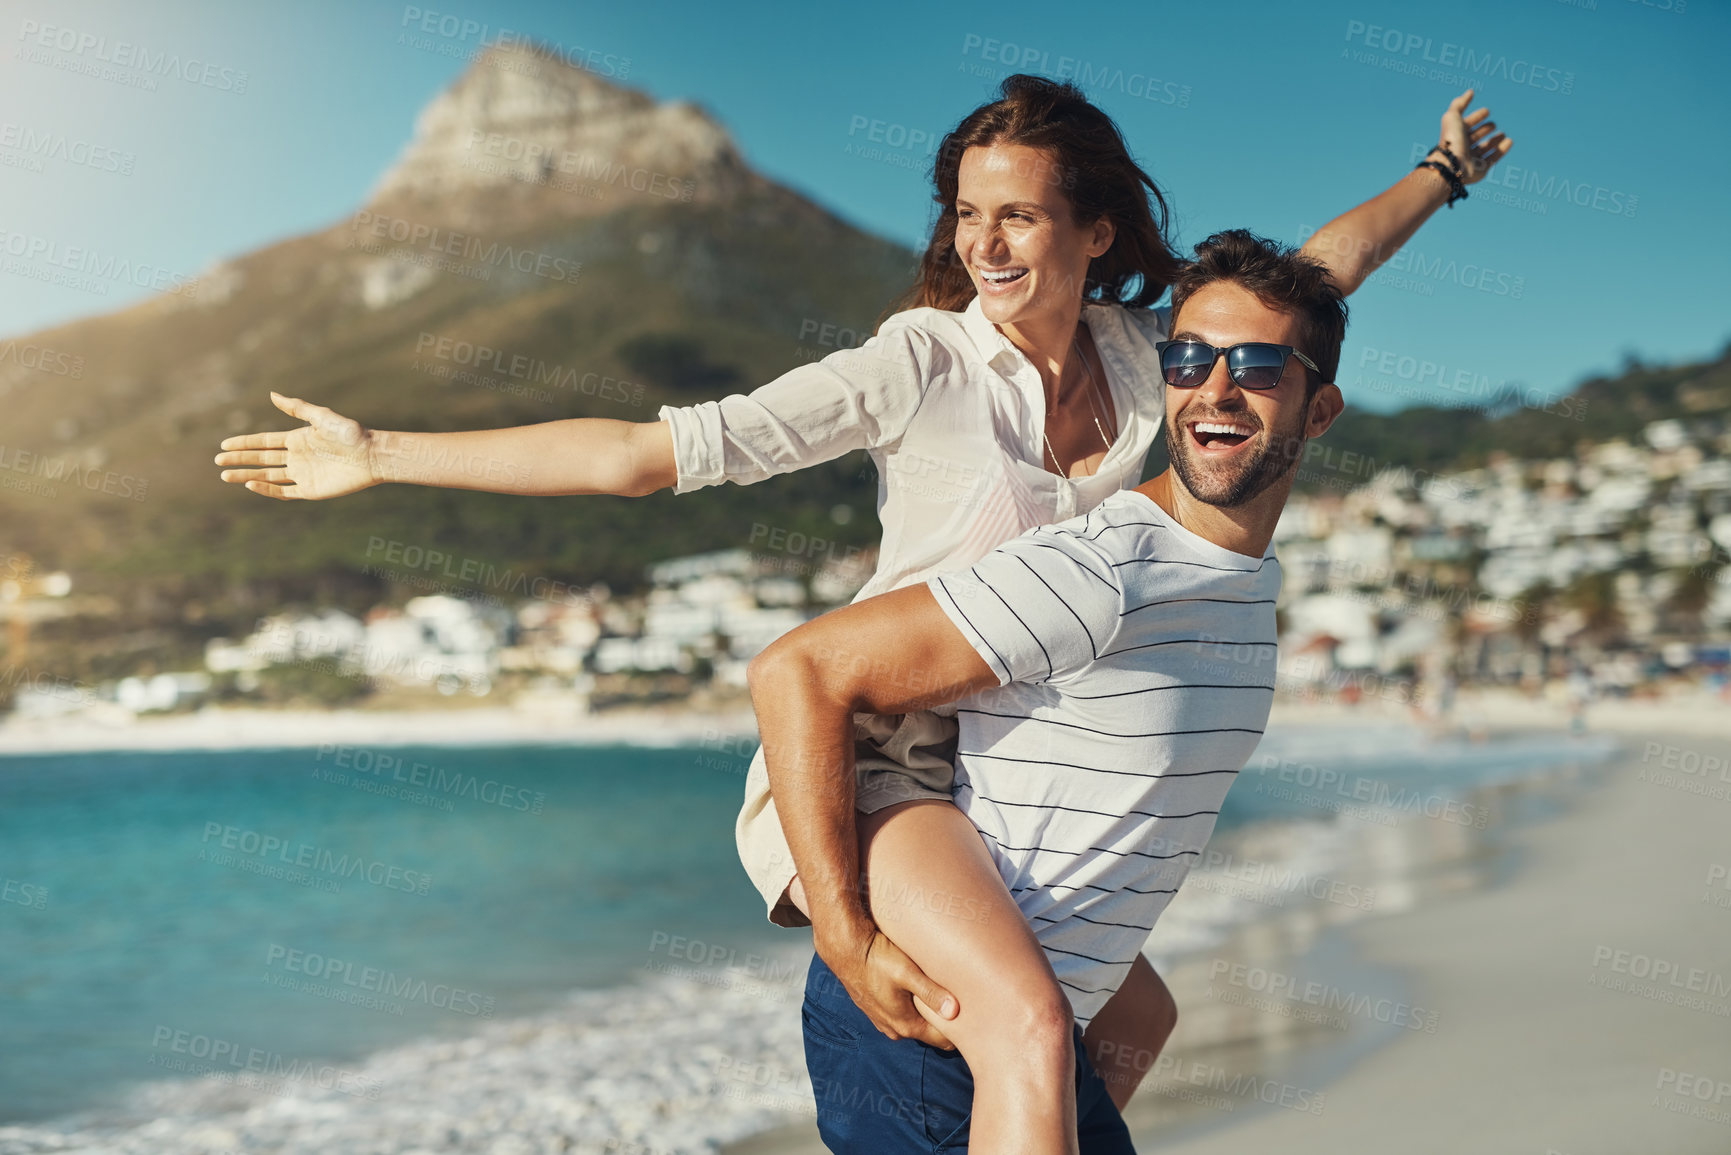 Buy stock photo Cropped shot of a handsome young man giving his girlfriend a piggyback ride at the beach